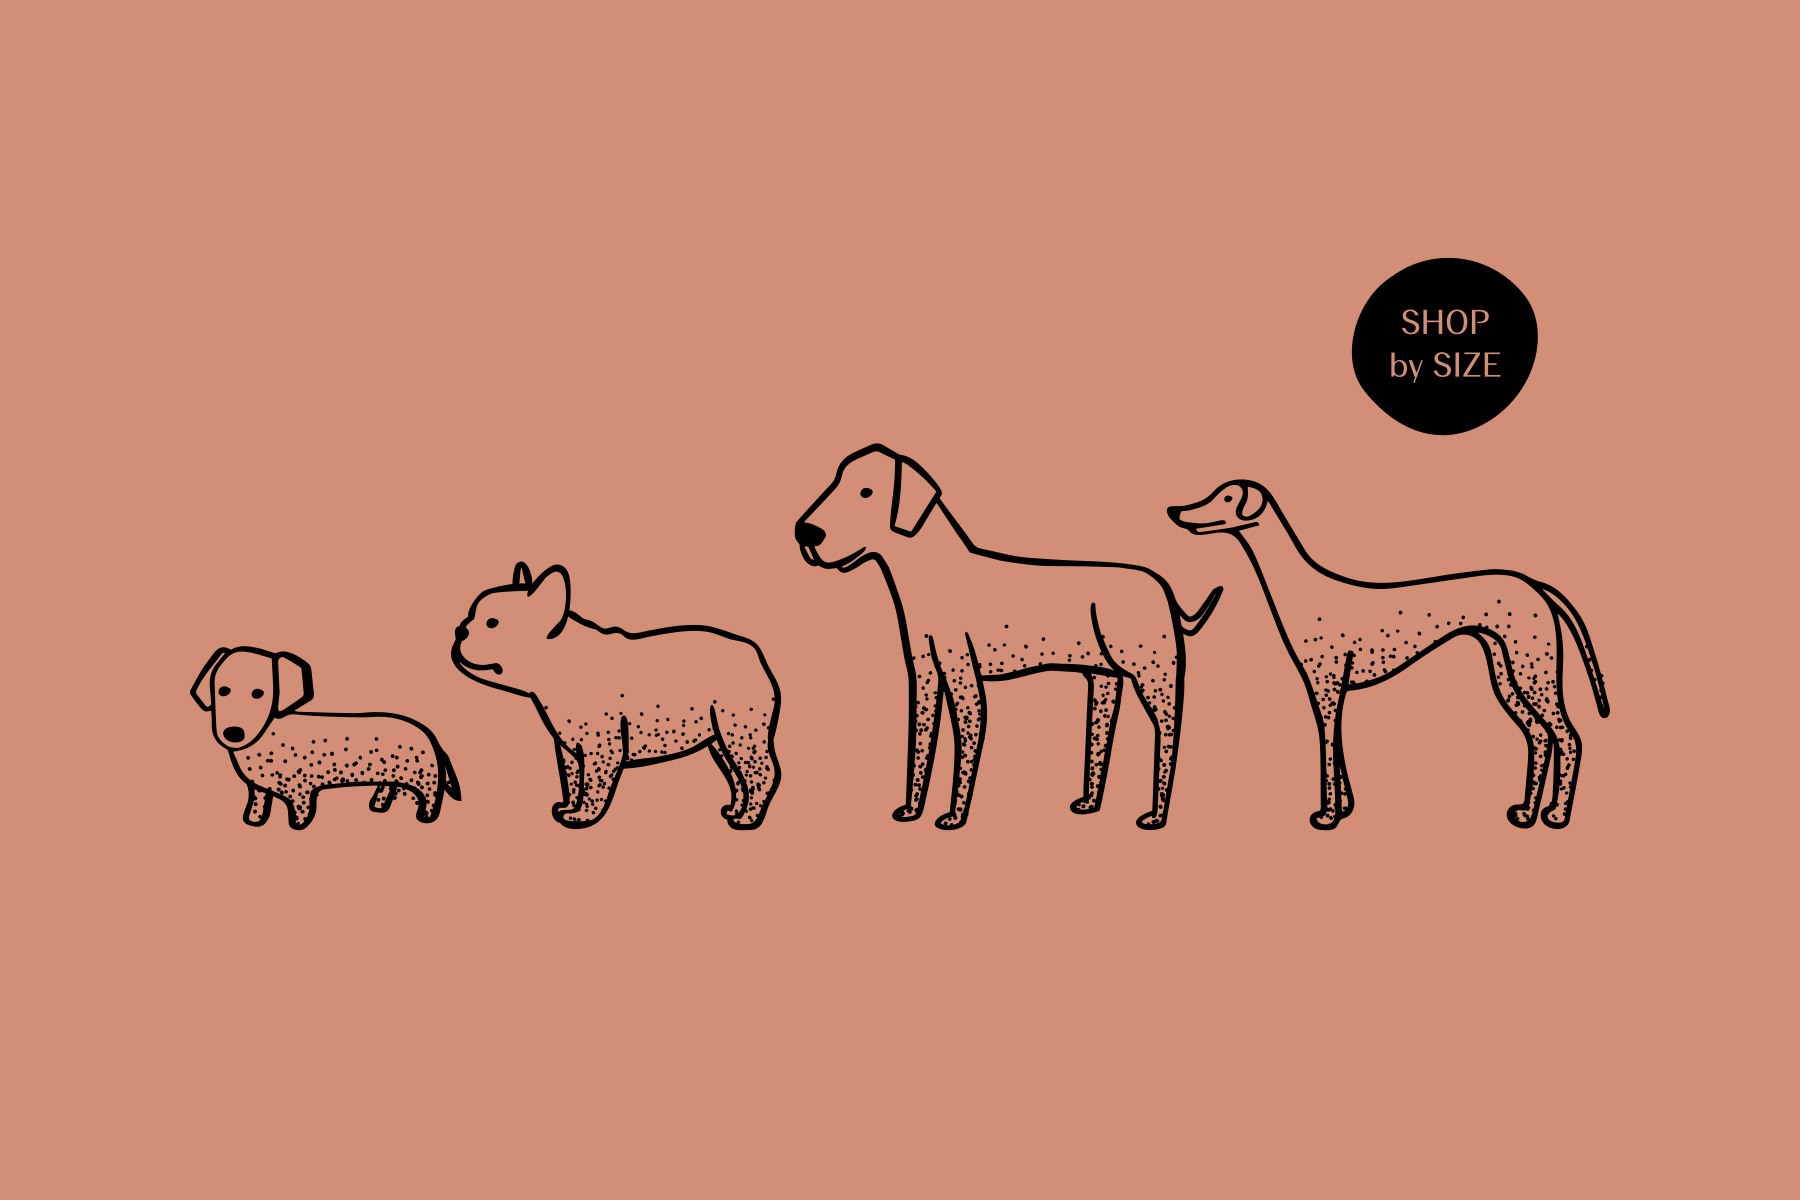 Hand drawn dog breeds in different shapes and sizes